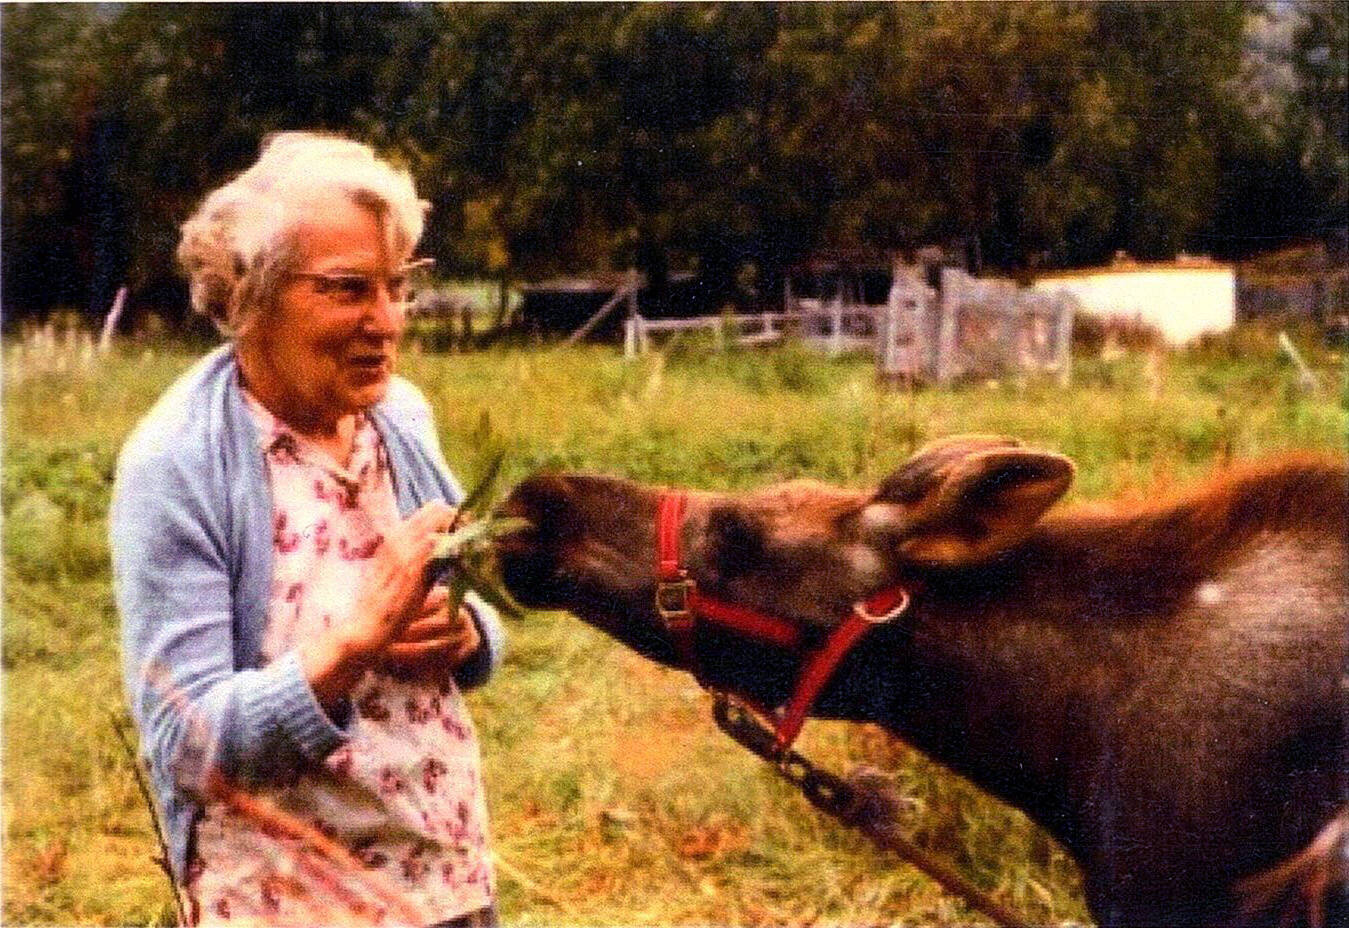 Emma Clark feeds the Clark “pet” moose named Spook in 1981. At the urging of state wildlife officials, Carl Clark had agreed to care for this calf at their home in Hope. (Photo 210.029.162, from the Clark Collection, courtesy of Hope and Sunrise Historical and Mining Museum)